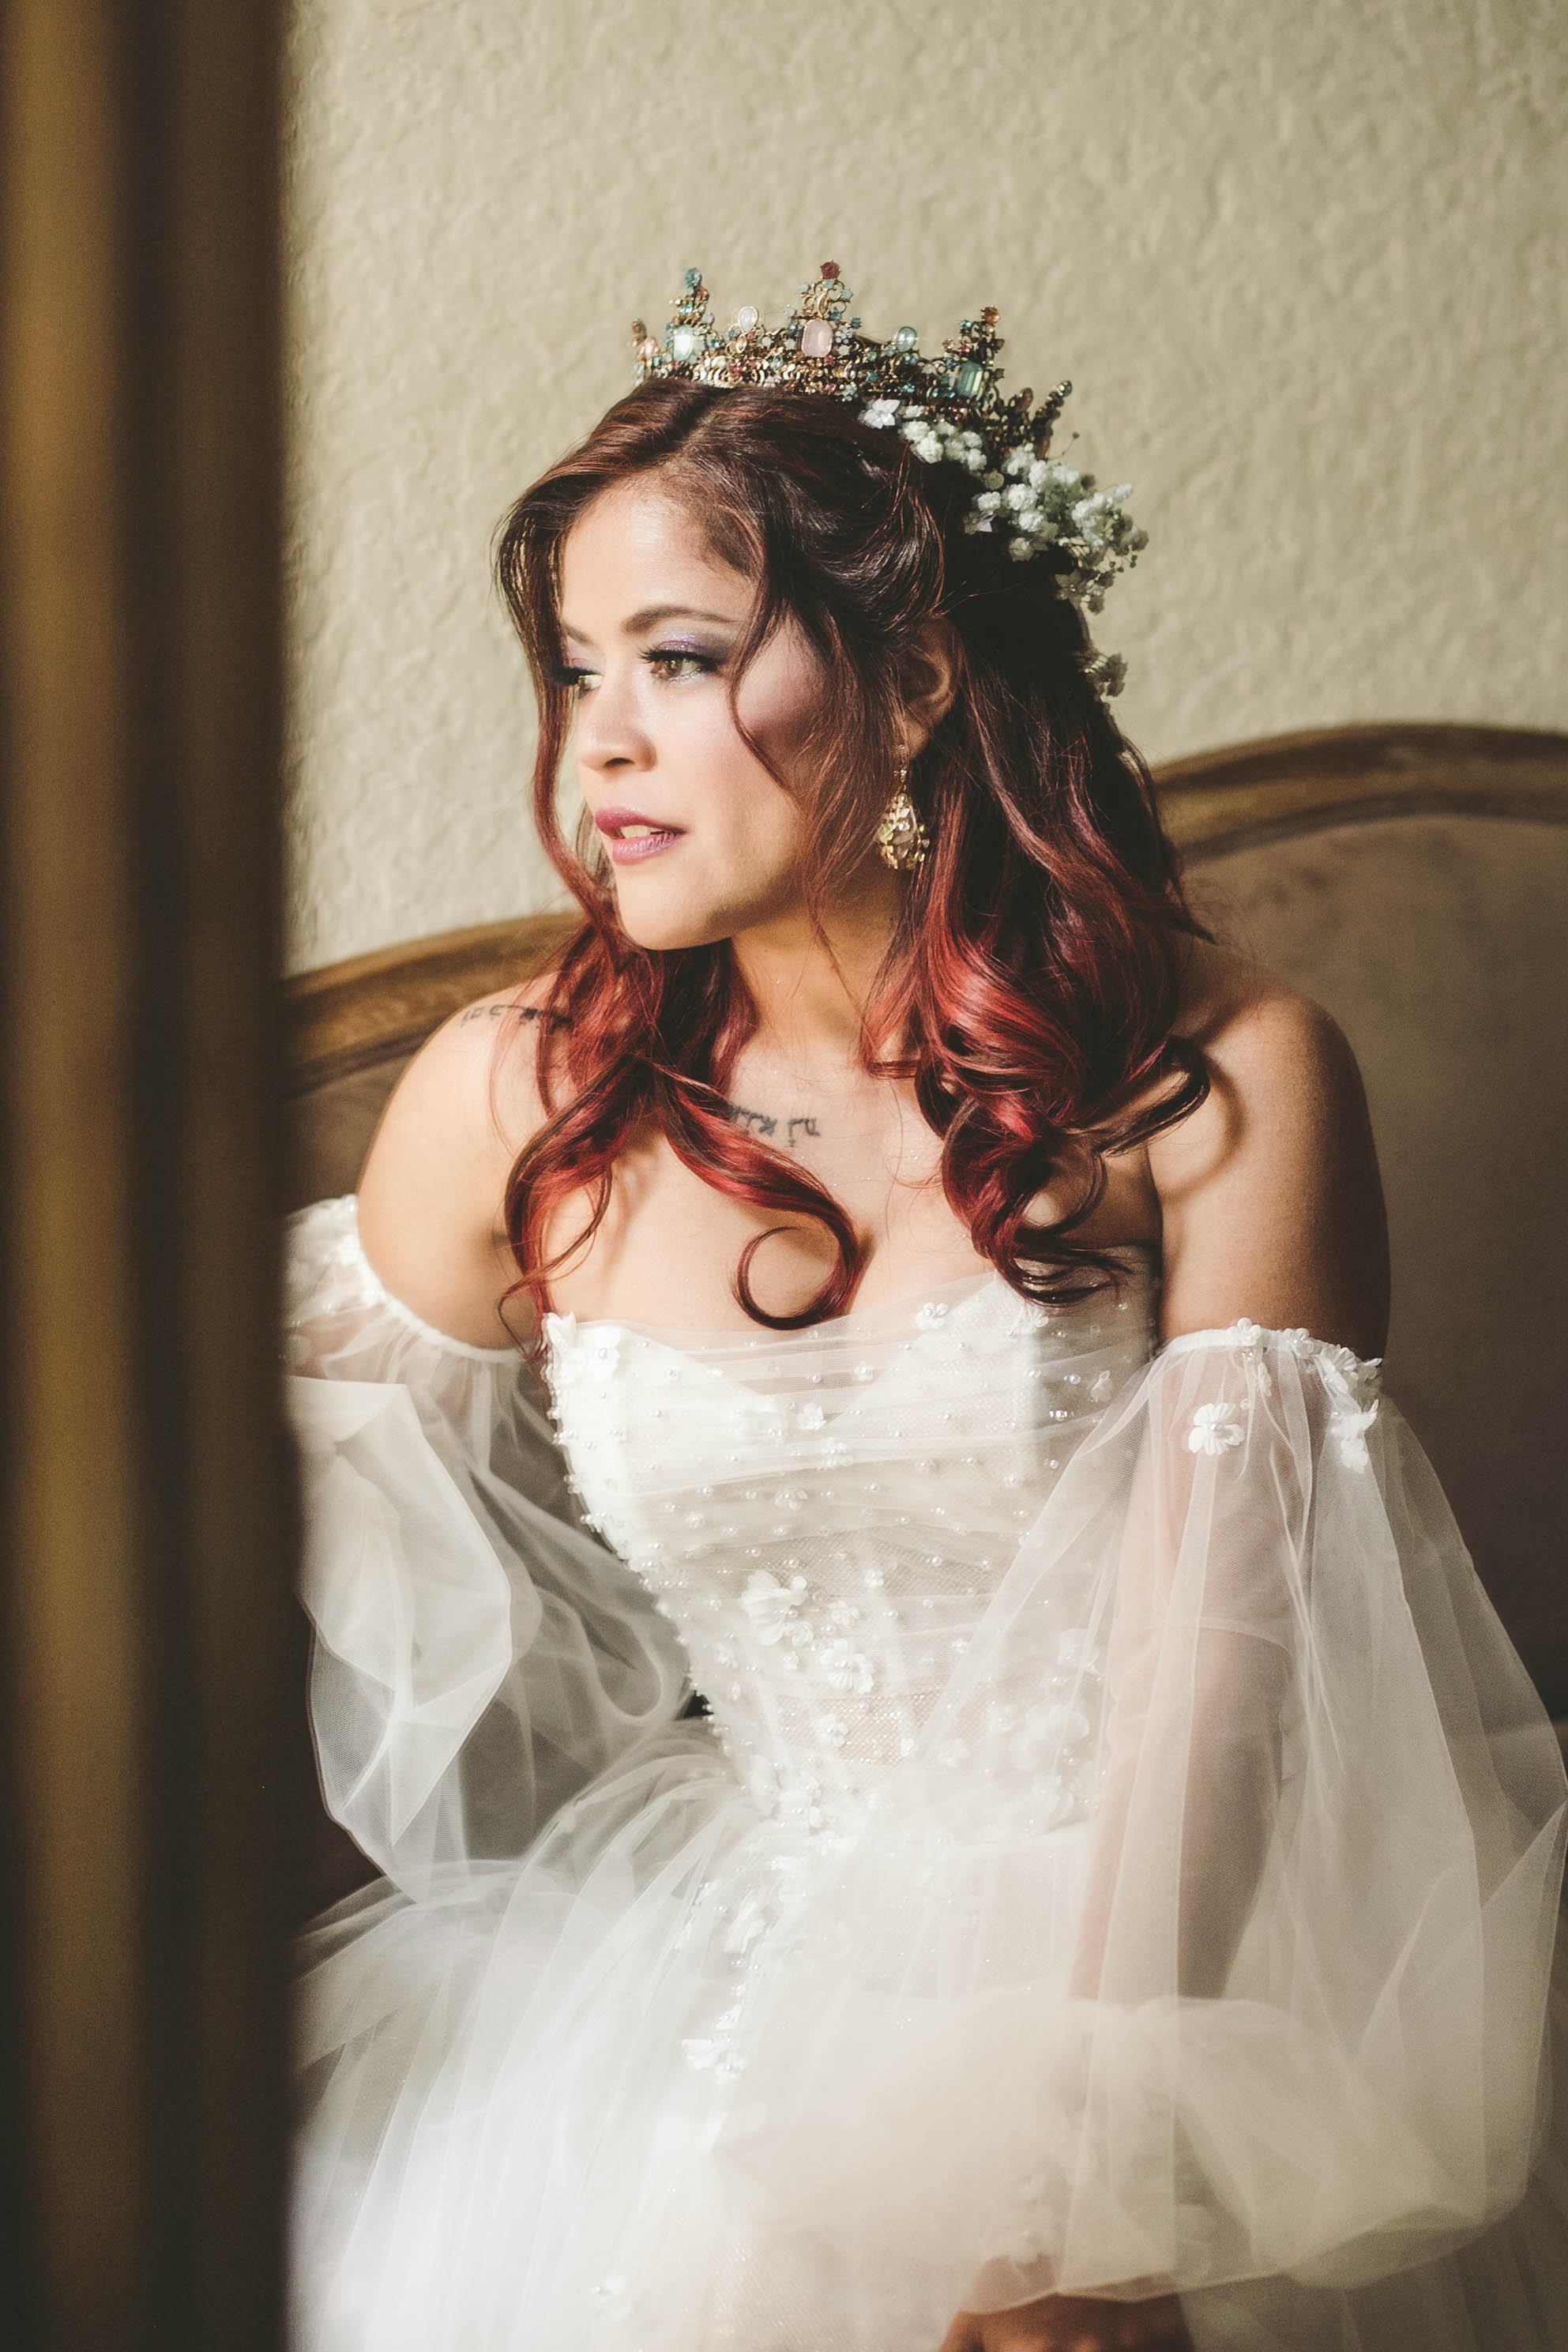 Bridal Portraits at The Sterling Event Venue in Minneola, FL